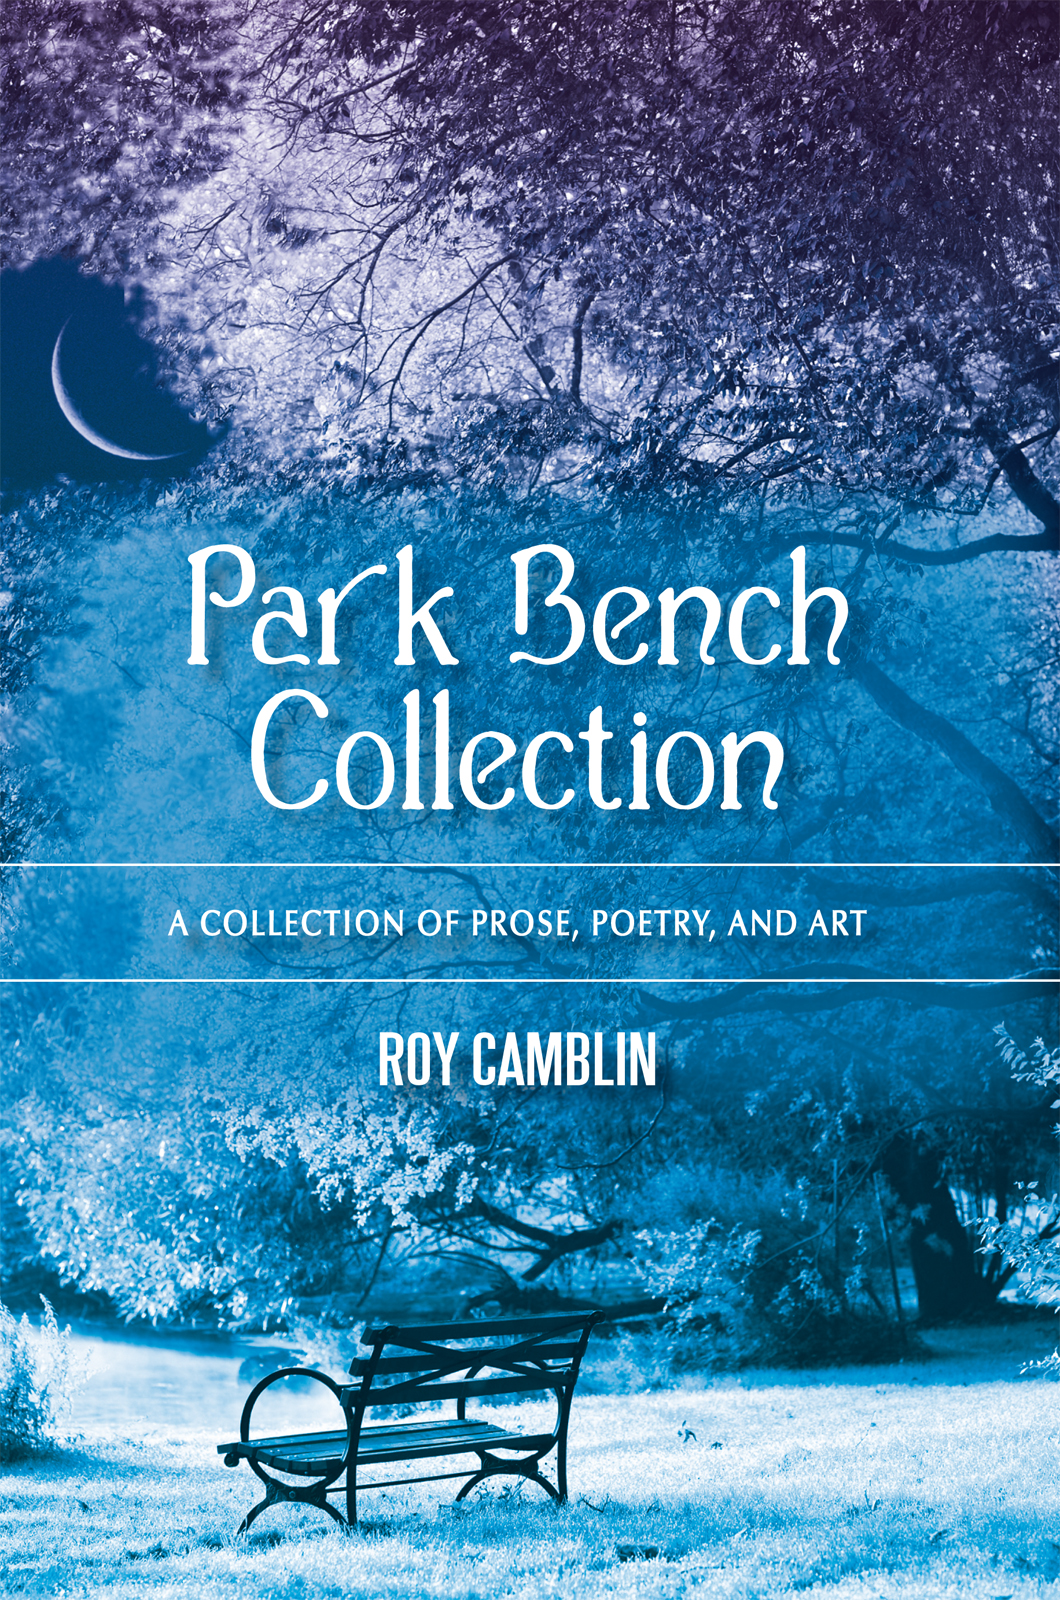 Park Bench Collection: A Collection of Prose, Poetry, and Art